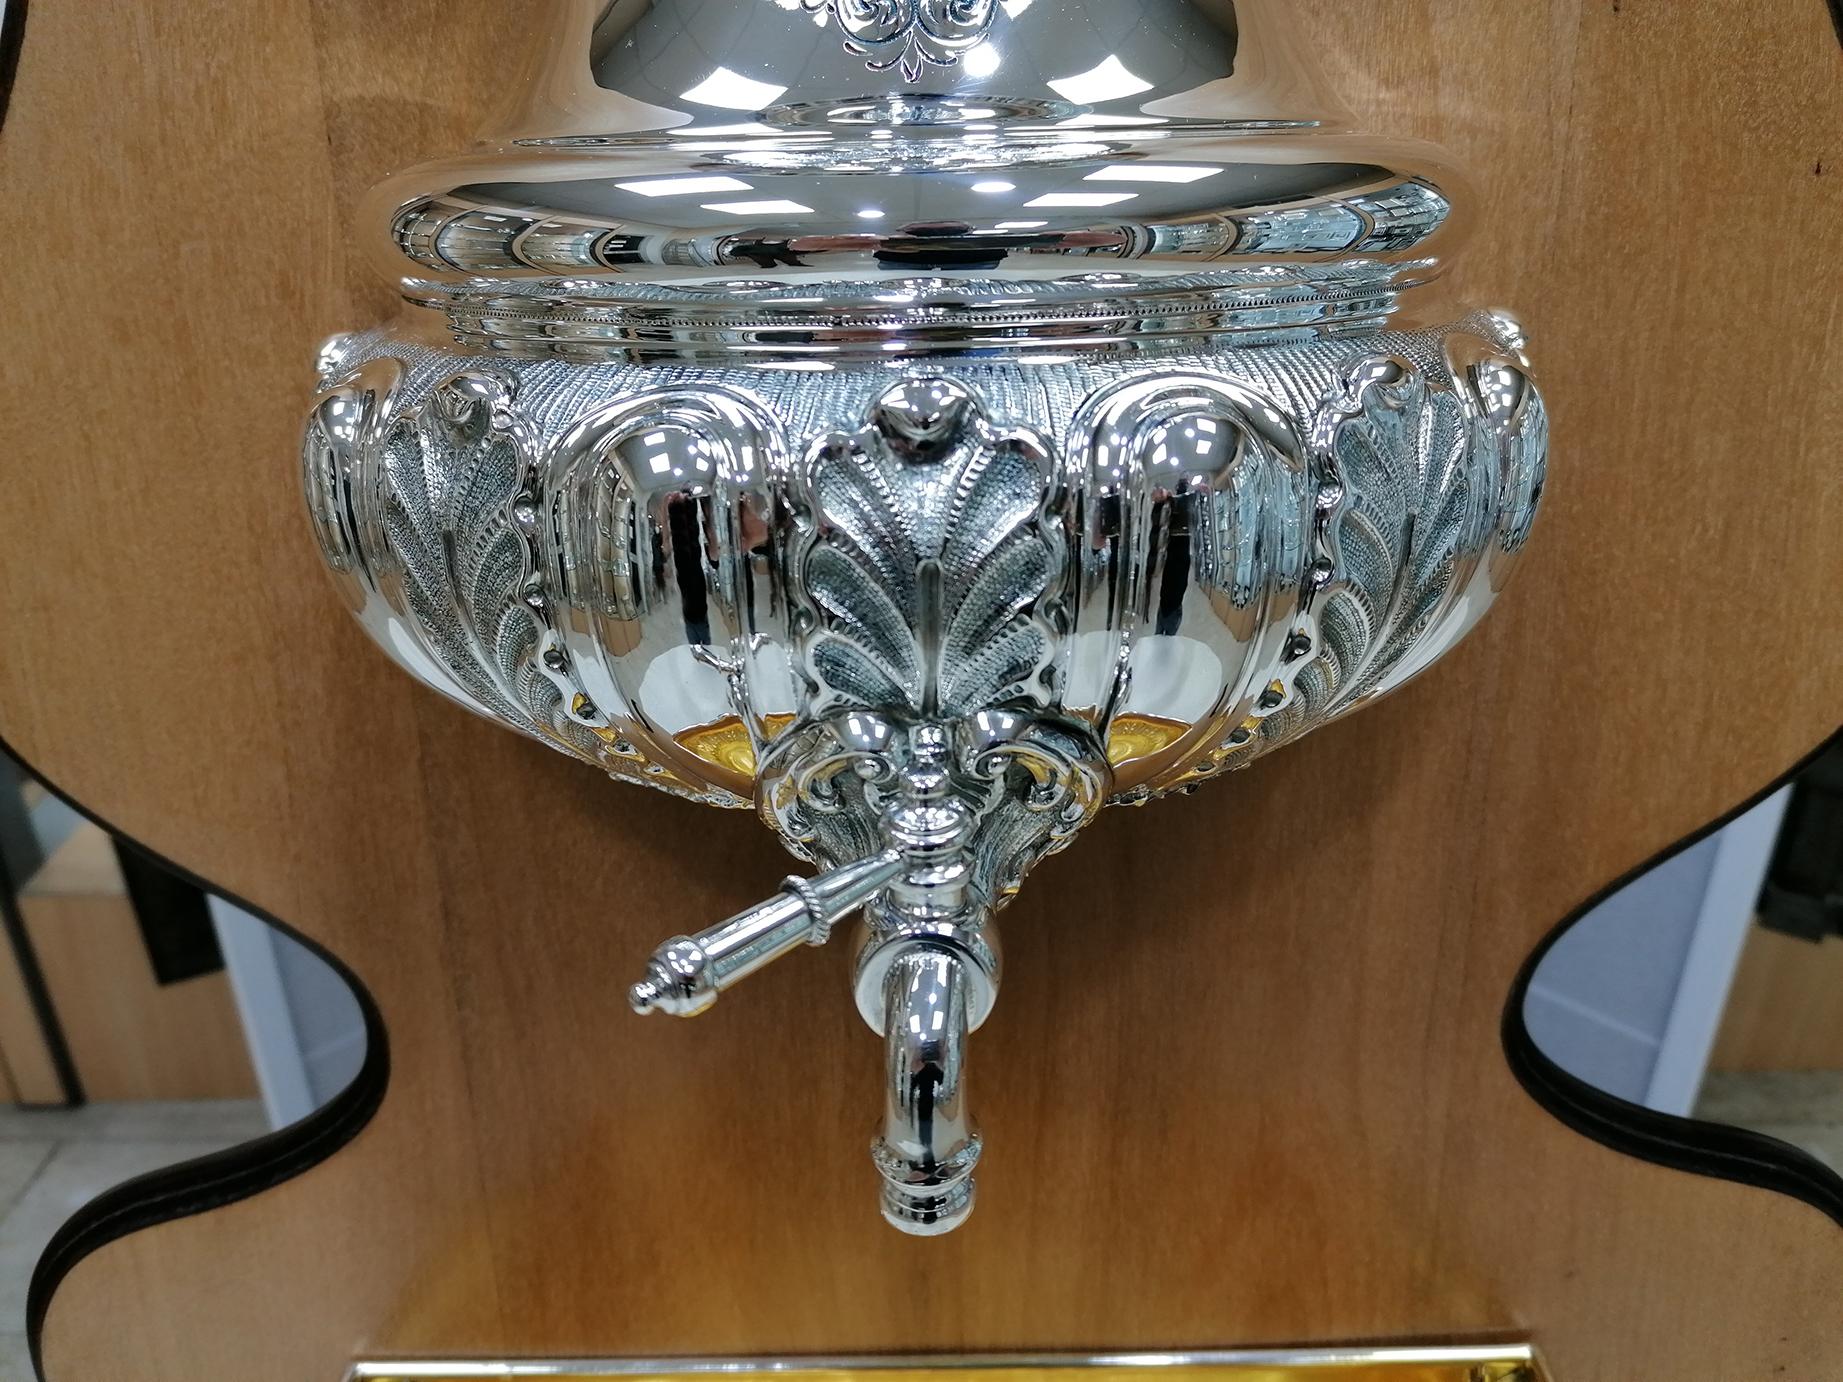 Holy water stoup in 800 solid silver.
Made entirely by hand, embossed and chiseled with leaves and pods motif. The lid is removable to allow water to be refilled. The lower part of the water collector is always embossed and chiseled with the same